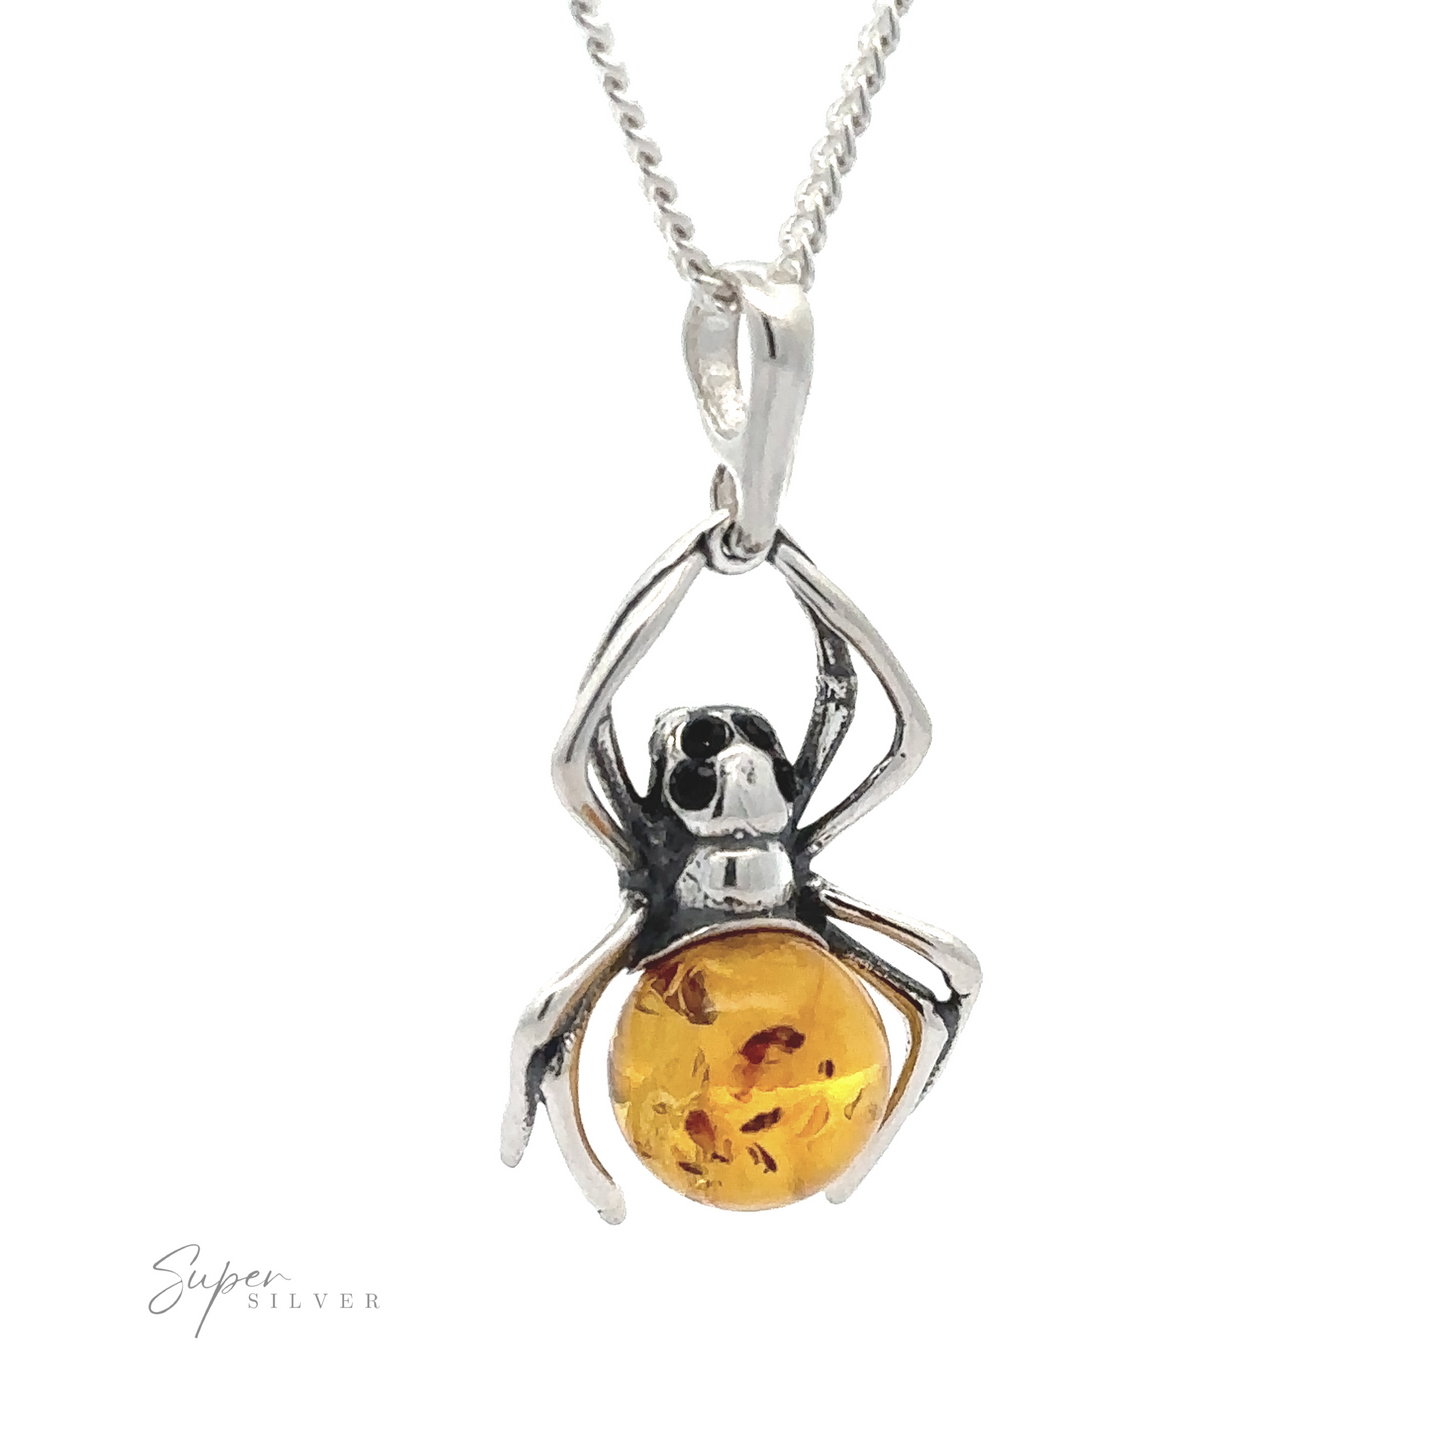 This Baltic Amber Spider Pendant with Onyx Eyes features a striking silver spider with onyx eyes and a round amber gemstone body, perfect for gothic fashion enthusiasts.